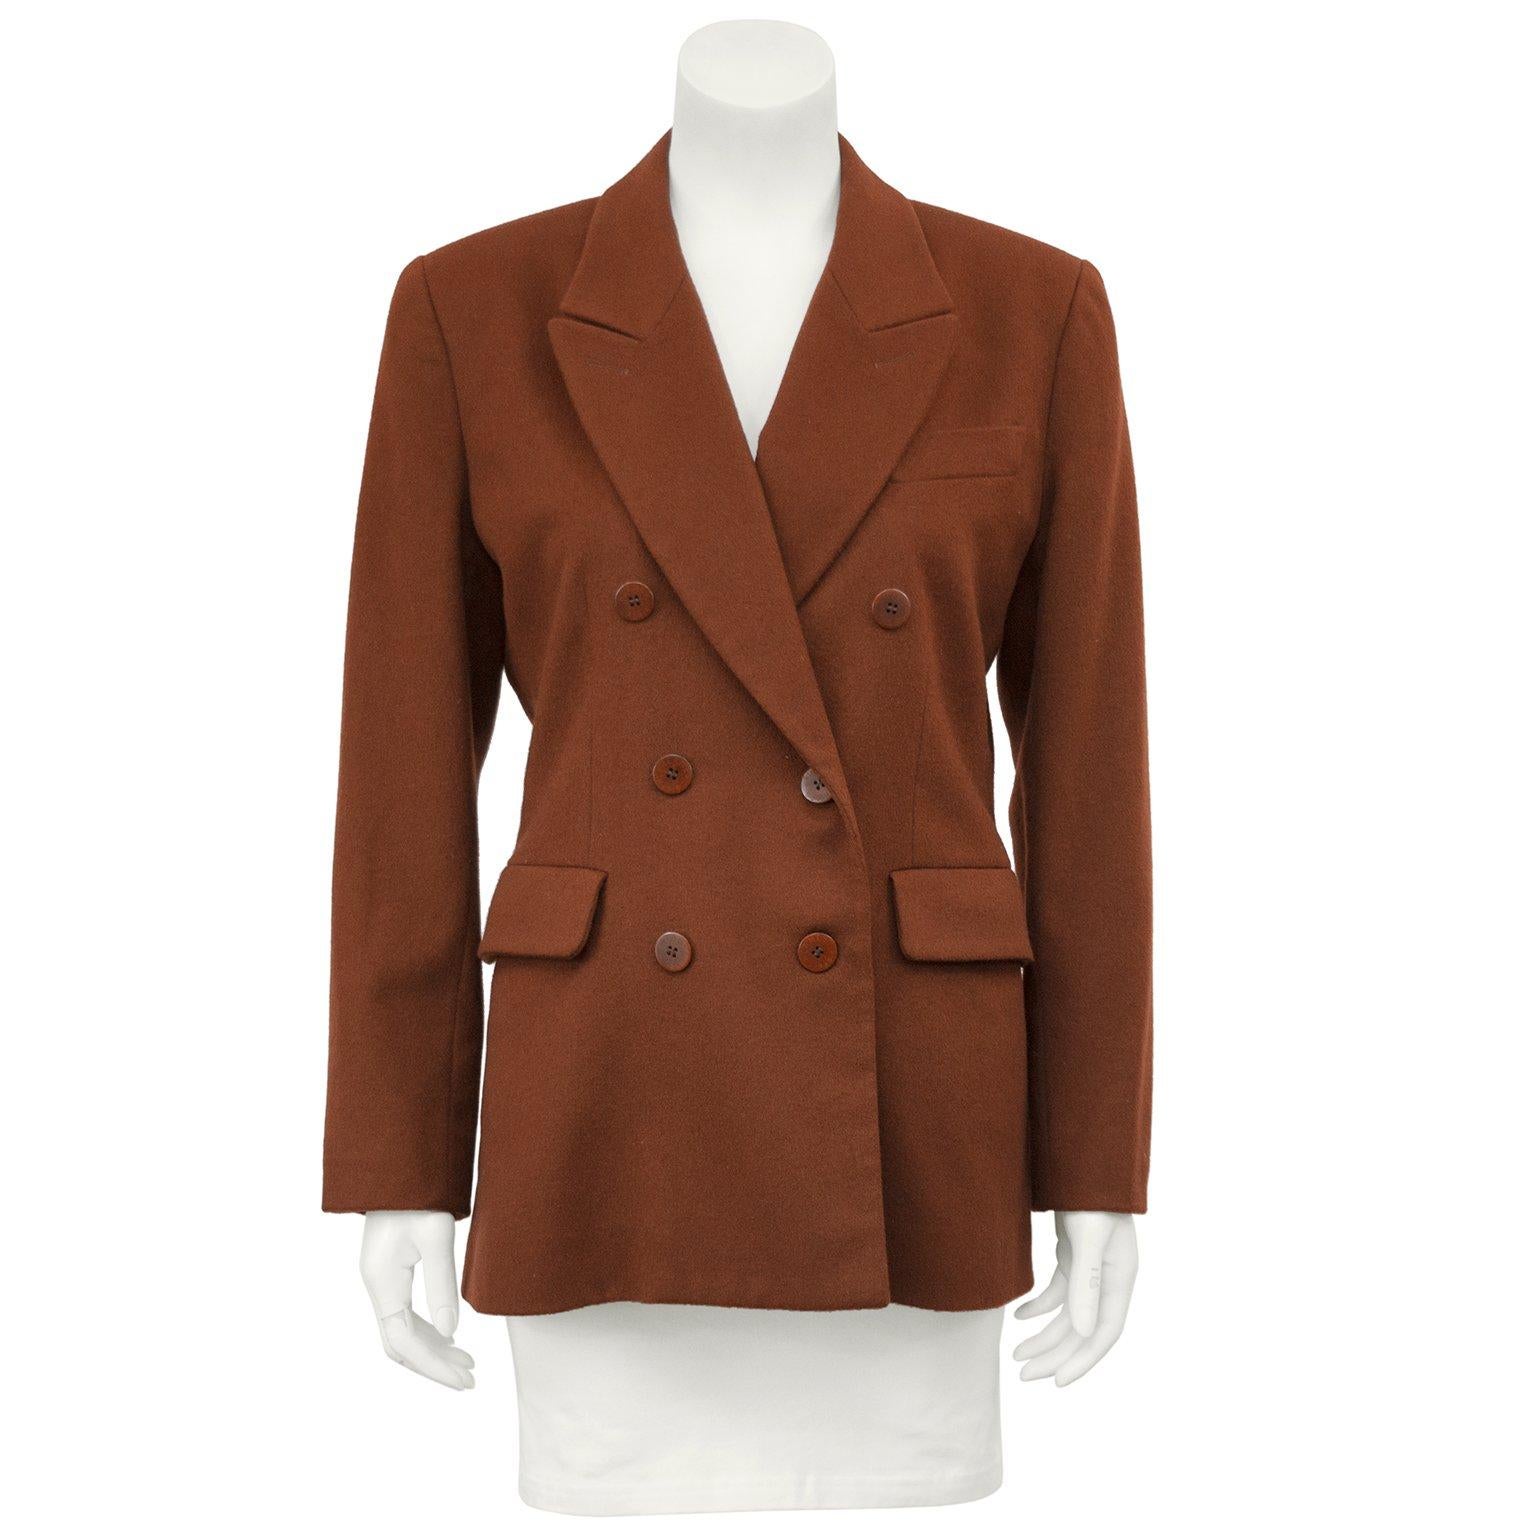 Women's 1990's Hermes Classic Cashmere Double Breasted Jacket in Rust